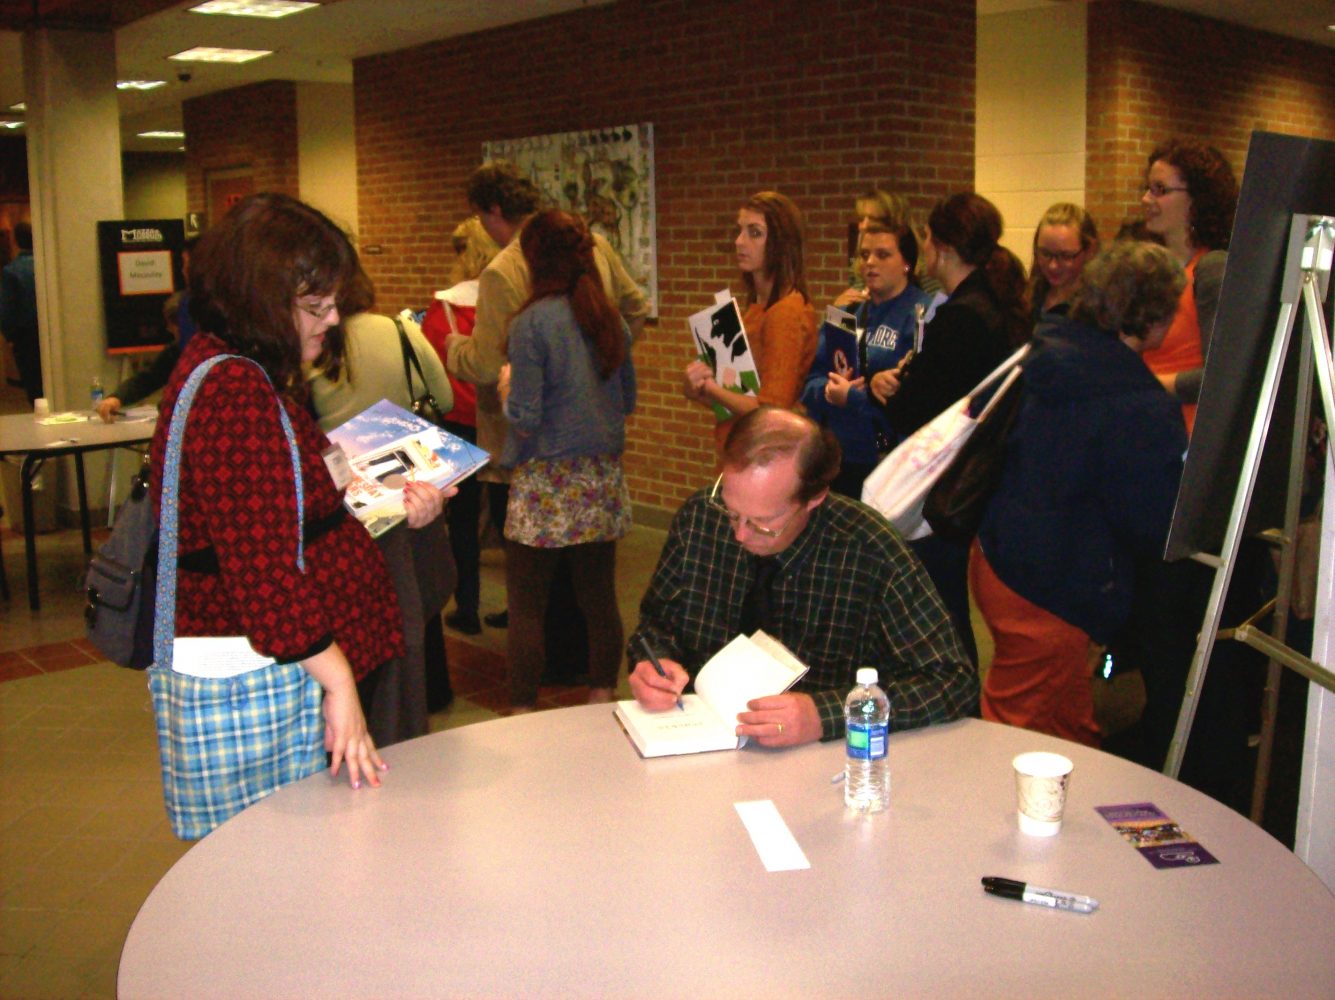 Professor and author Gary Schmidt signs a book at the Mazza conference.  Photo by Anna Lambers